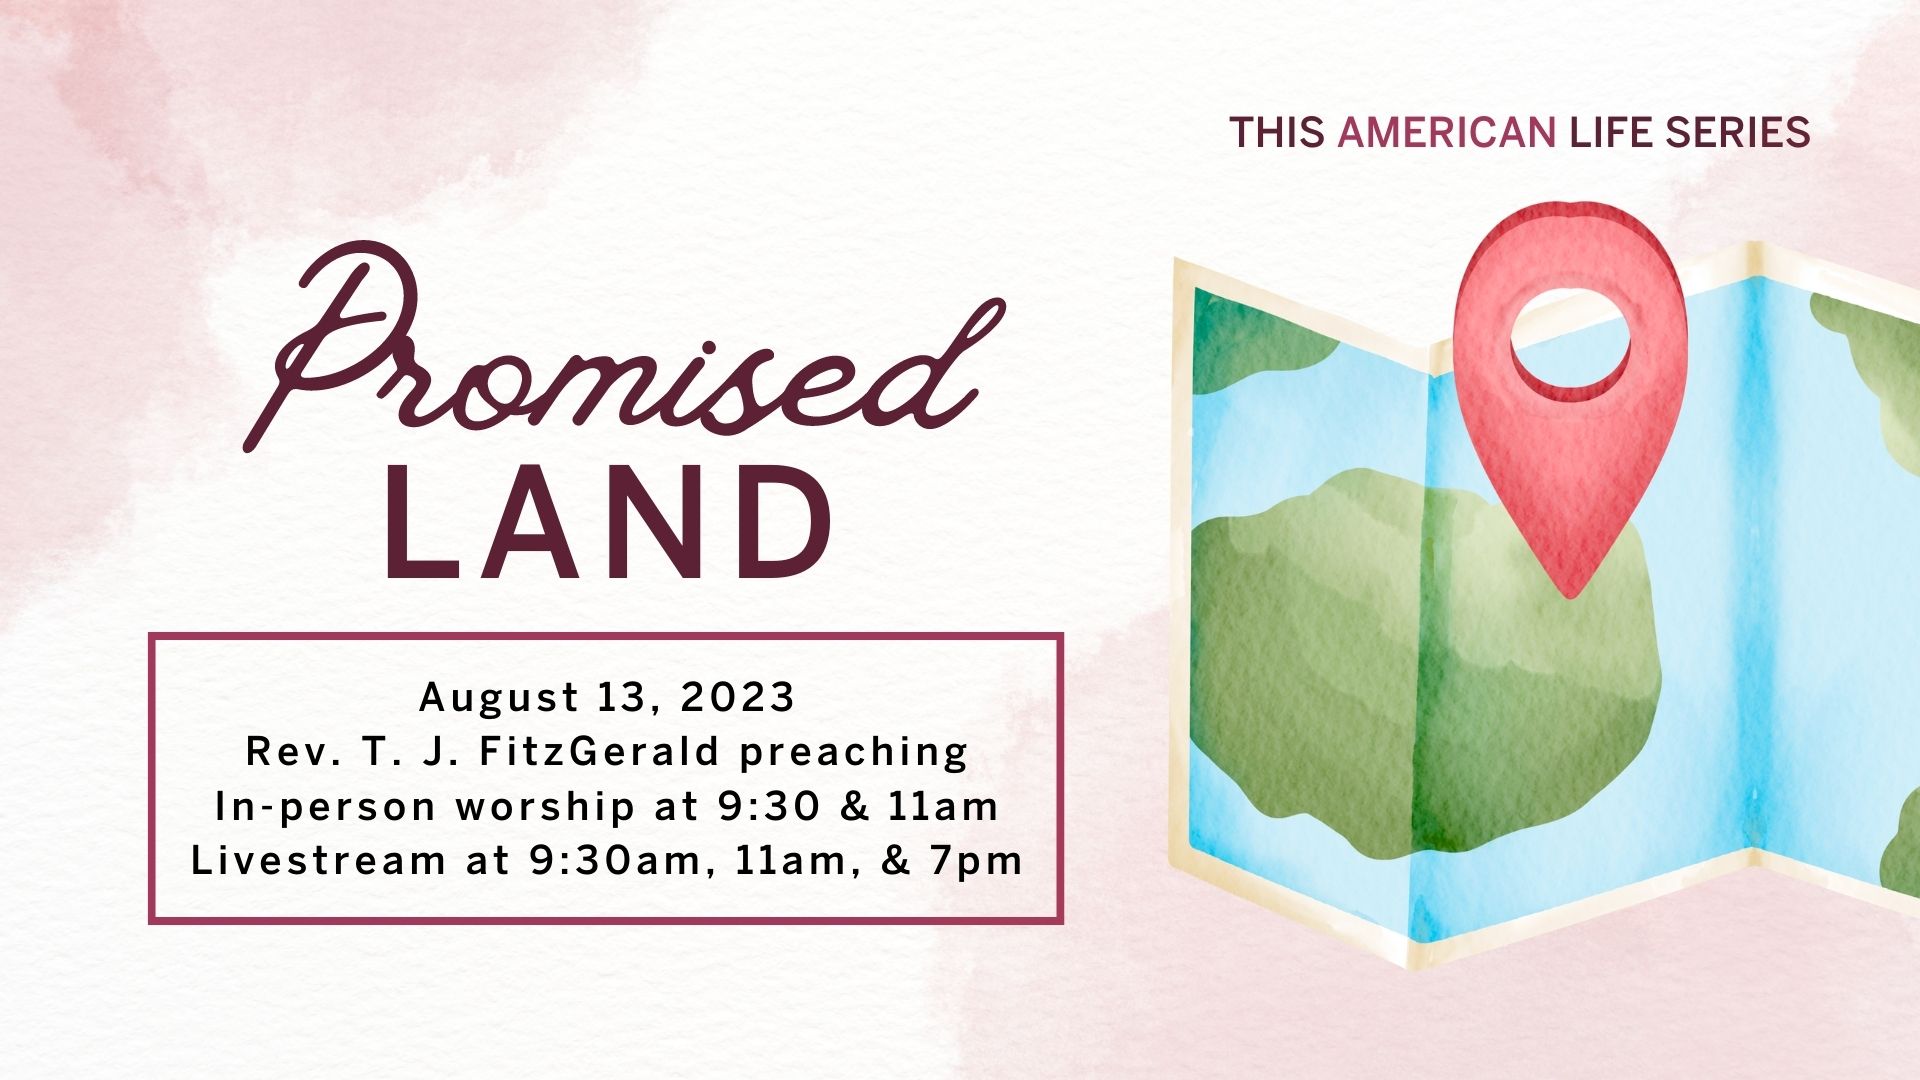 Promised Land - This American Life